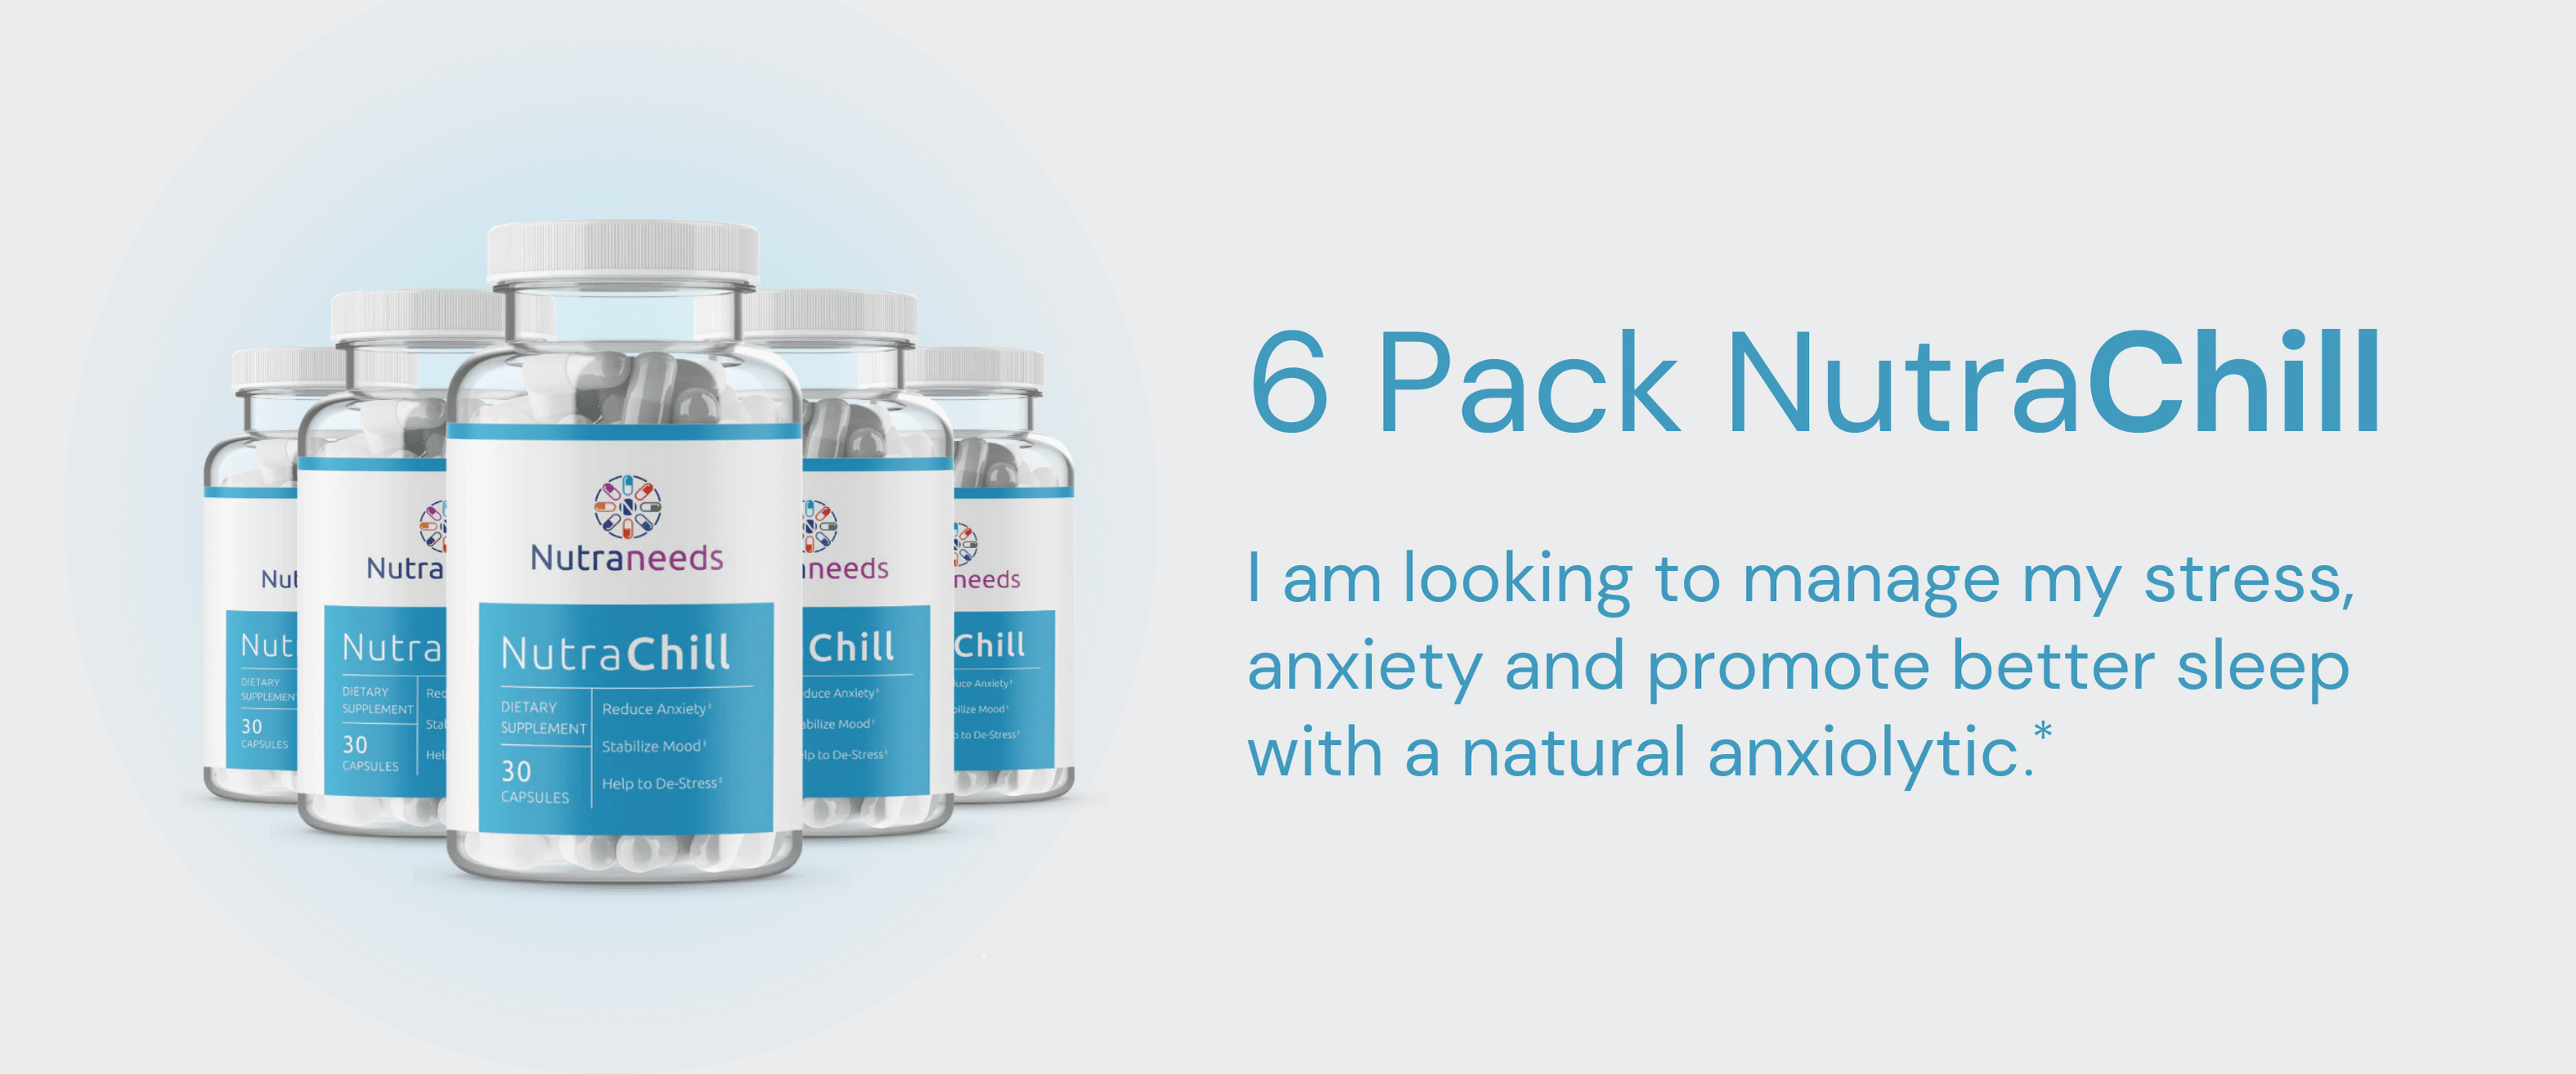 6 Pack of NutraChill Supplements to manage stress and anxiety